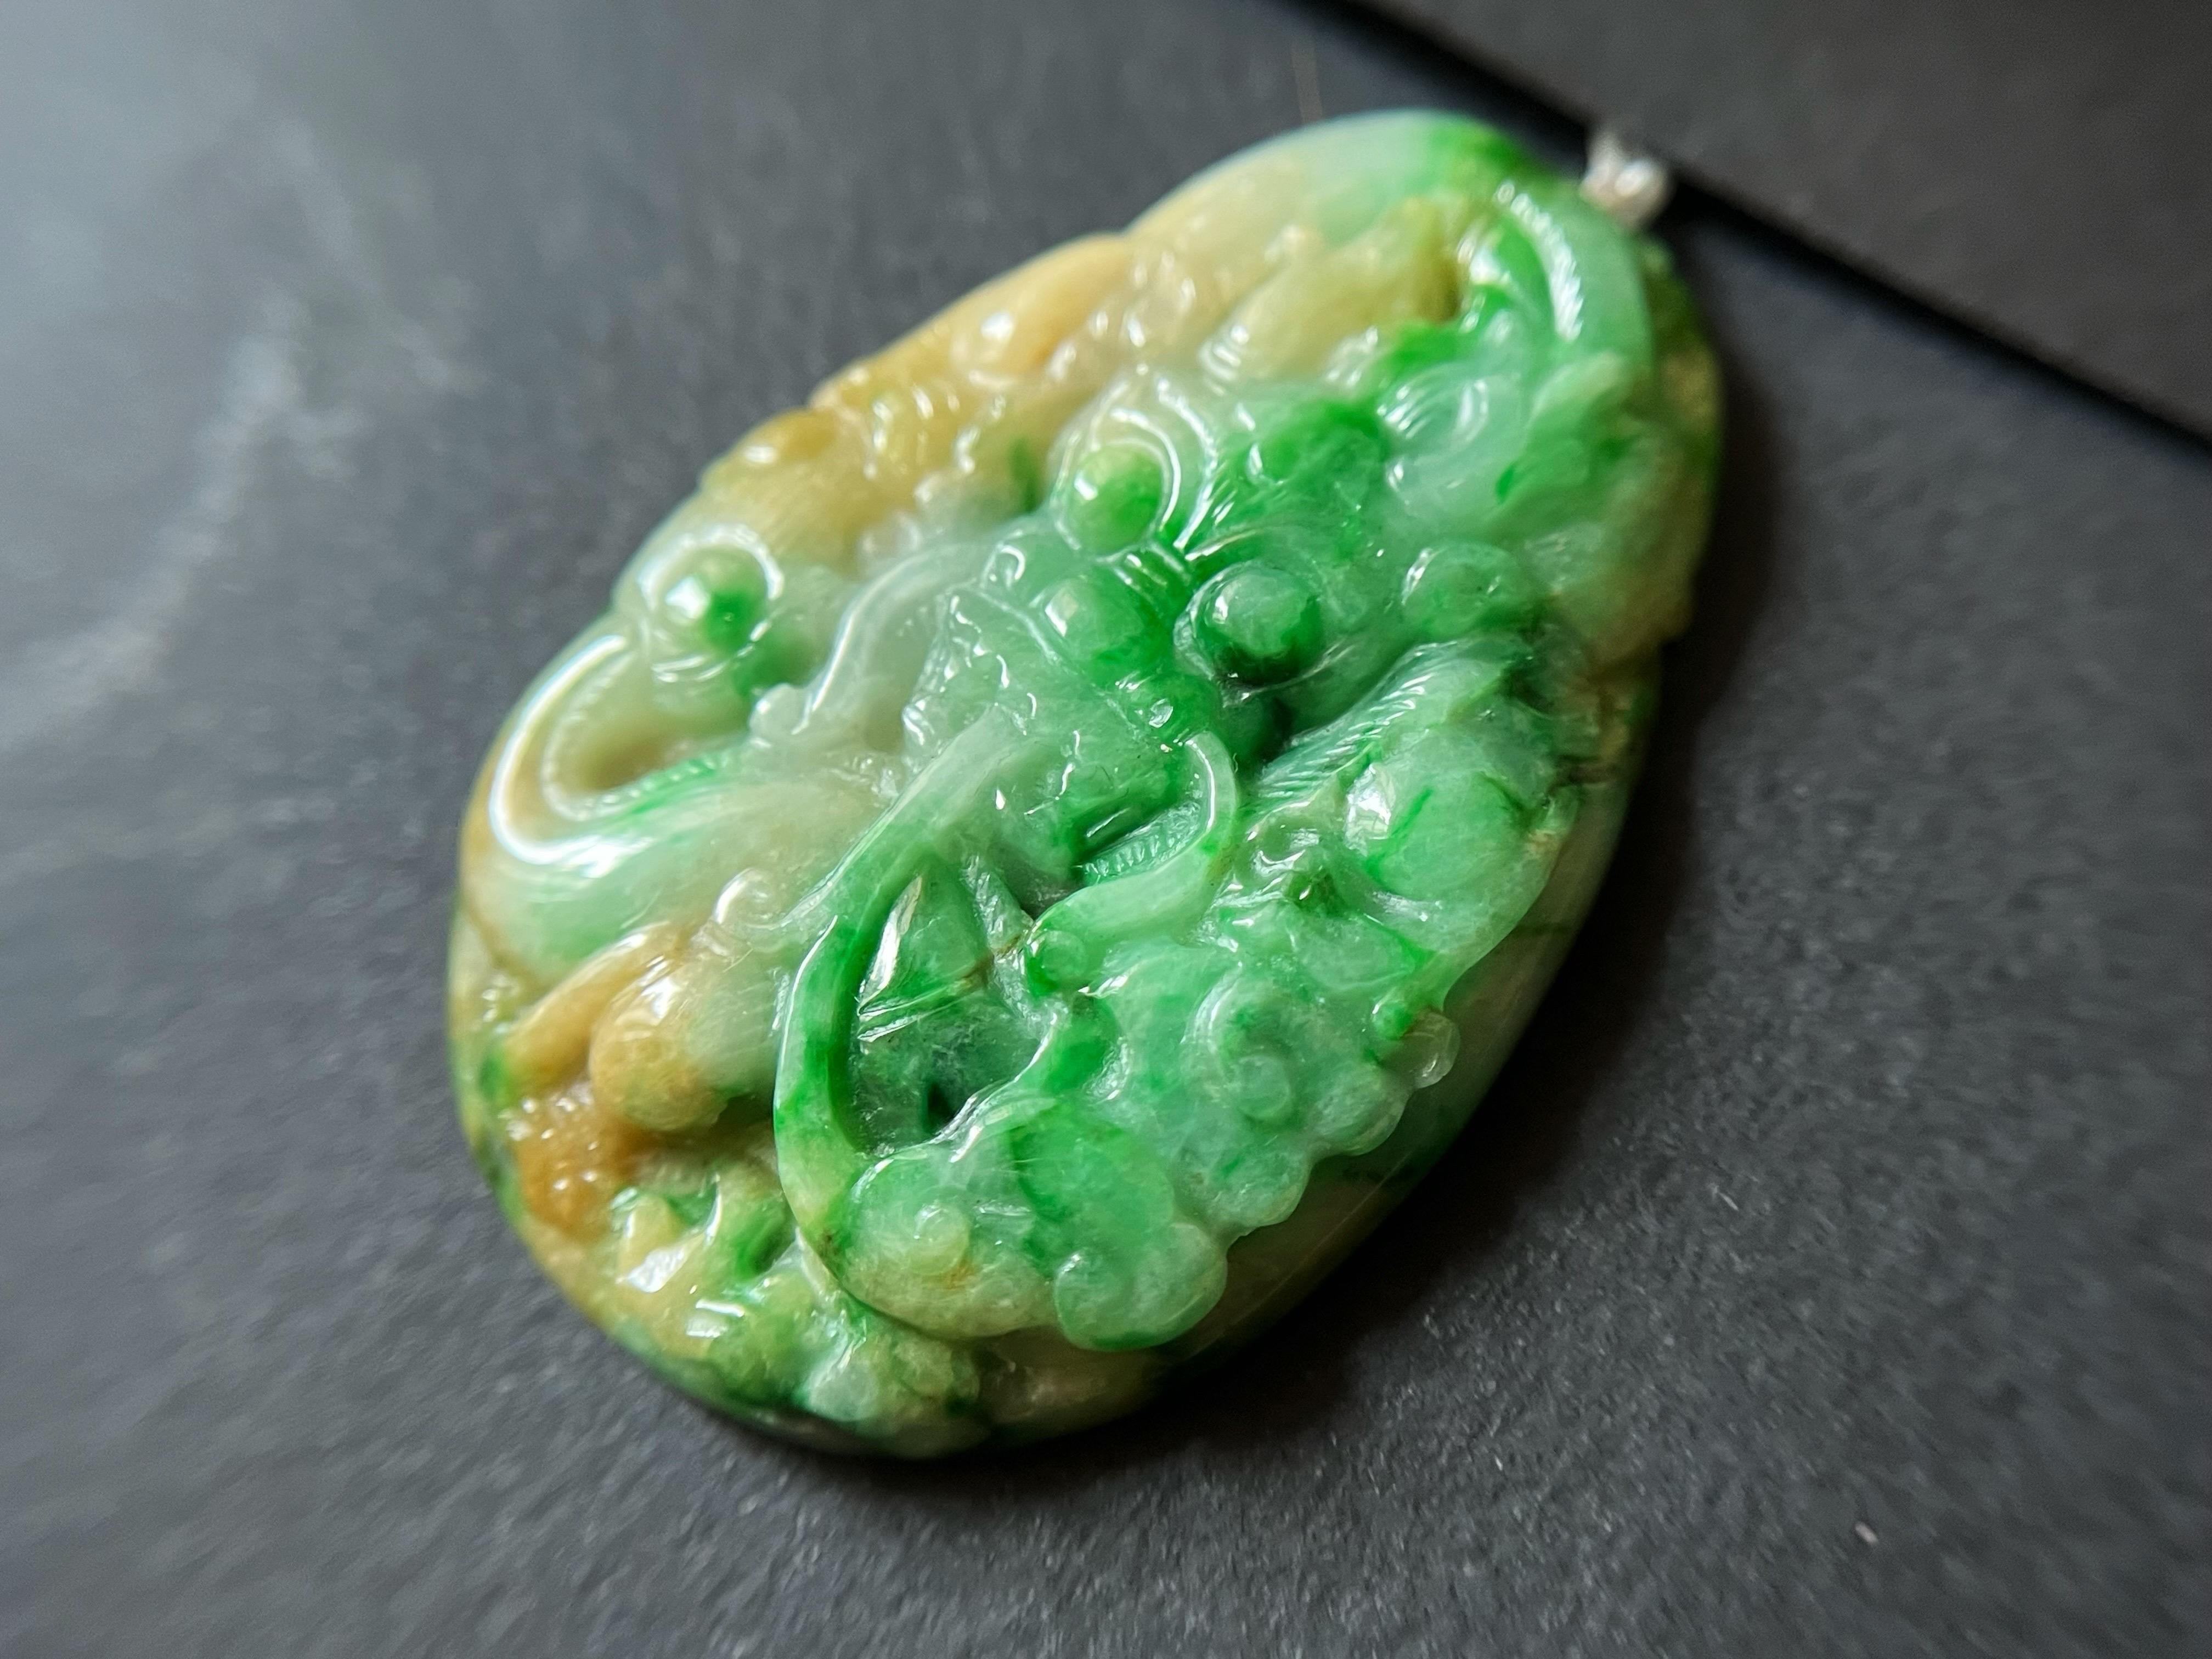 This exquisite masterpiece is carved from the finest 100% natural, untreated, and undyed Type-A Myanmar jade. This one-of-a-kind pendant boasts a unique tricolor of vivid green, honey-yellow, and white hues gifted by Mother Nature herself, making it